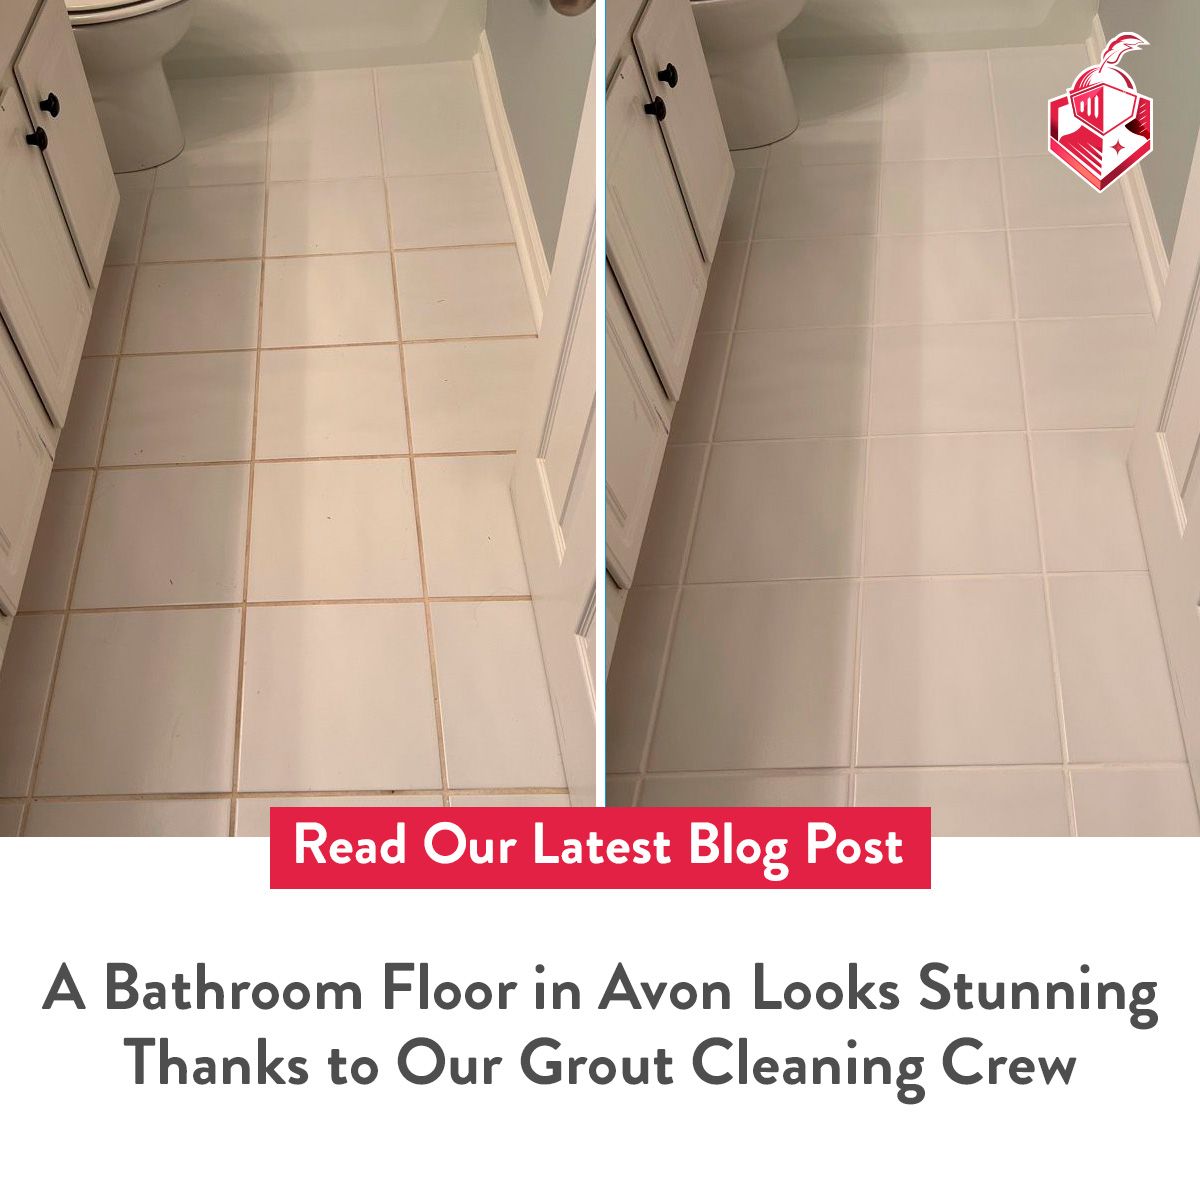 A Bathroom Floor in Avon Looks Stunning Thanks to Our Grout Cleaning Crew